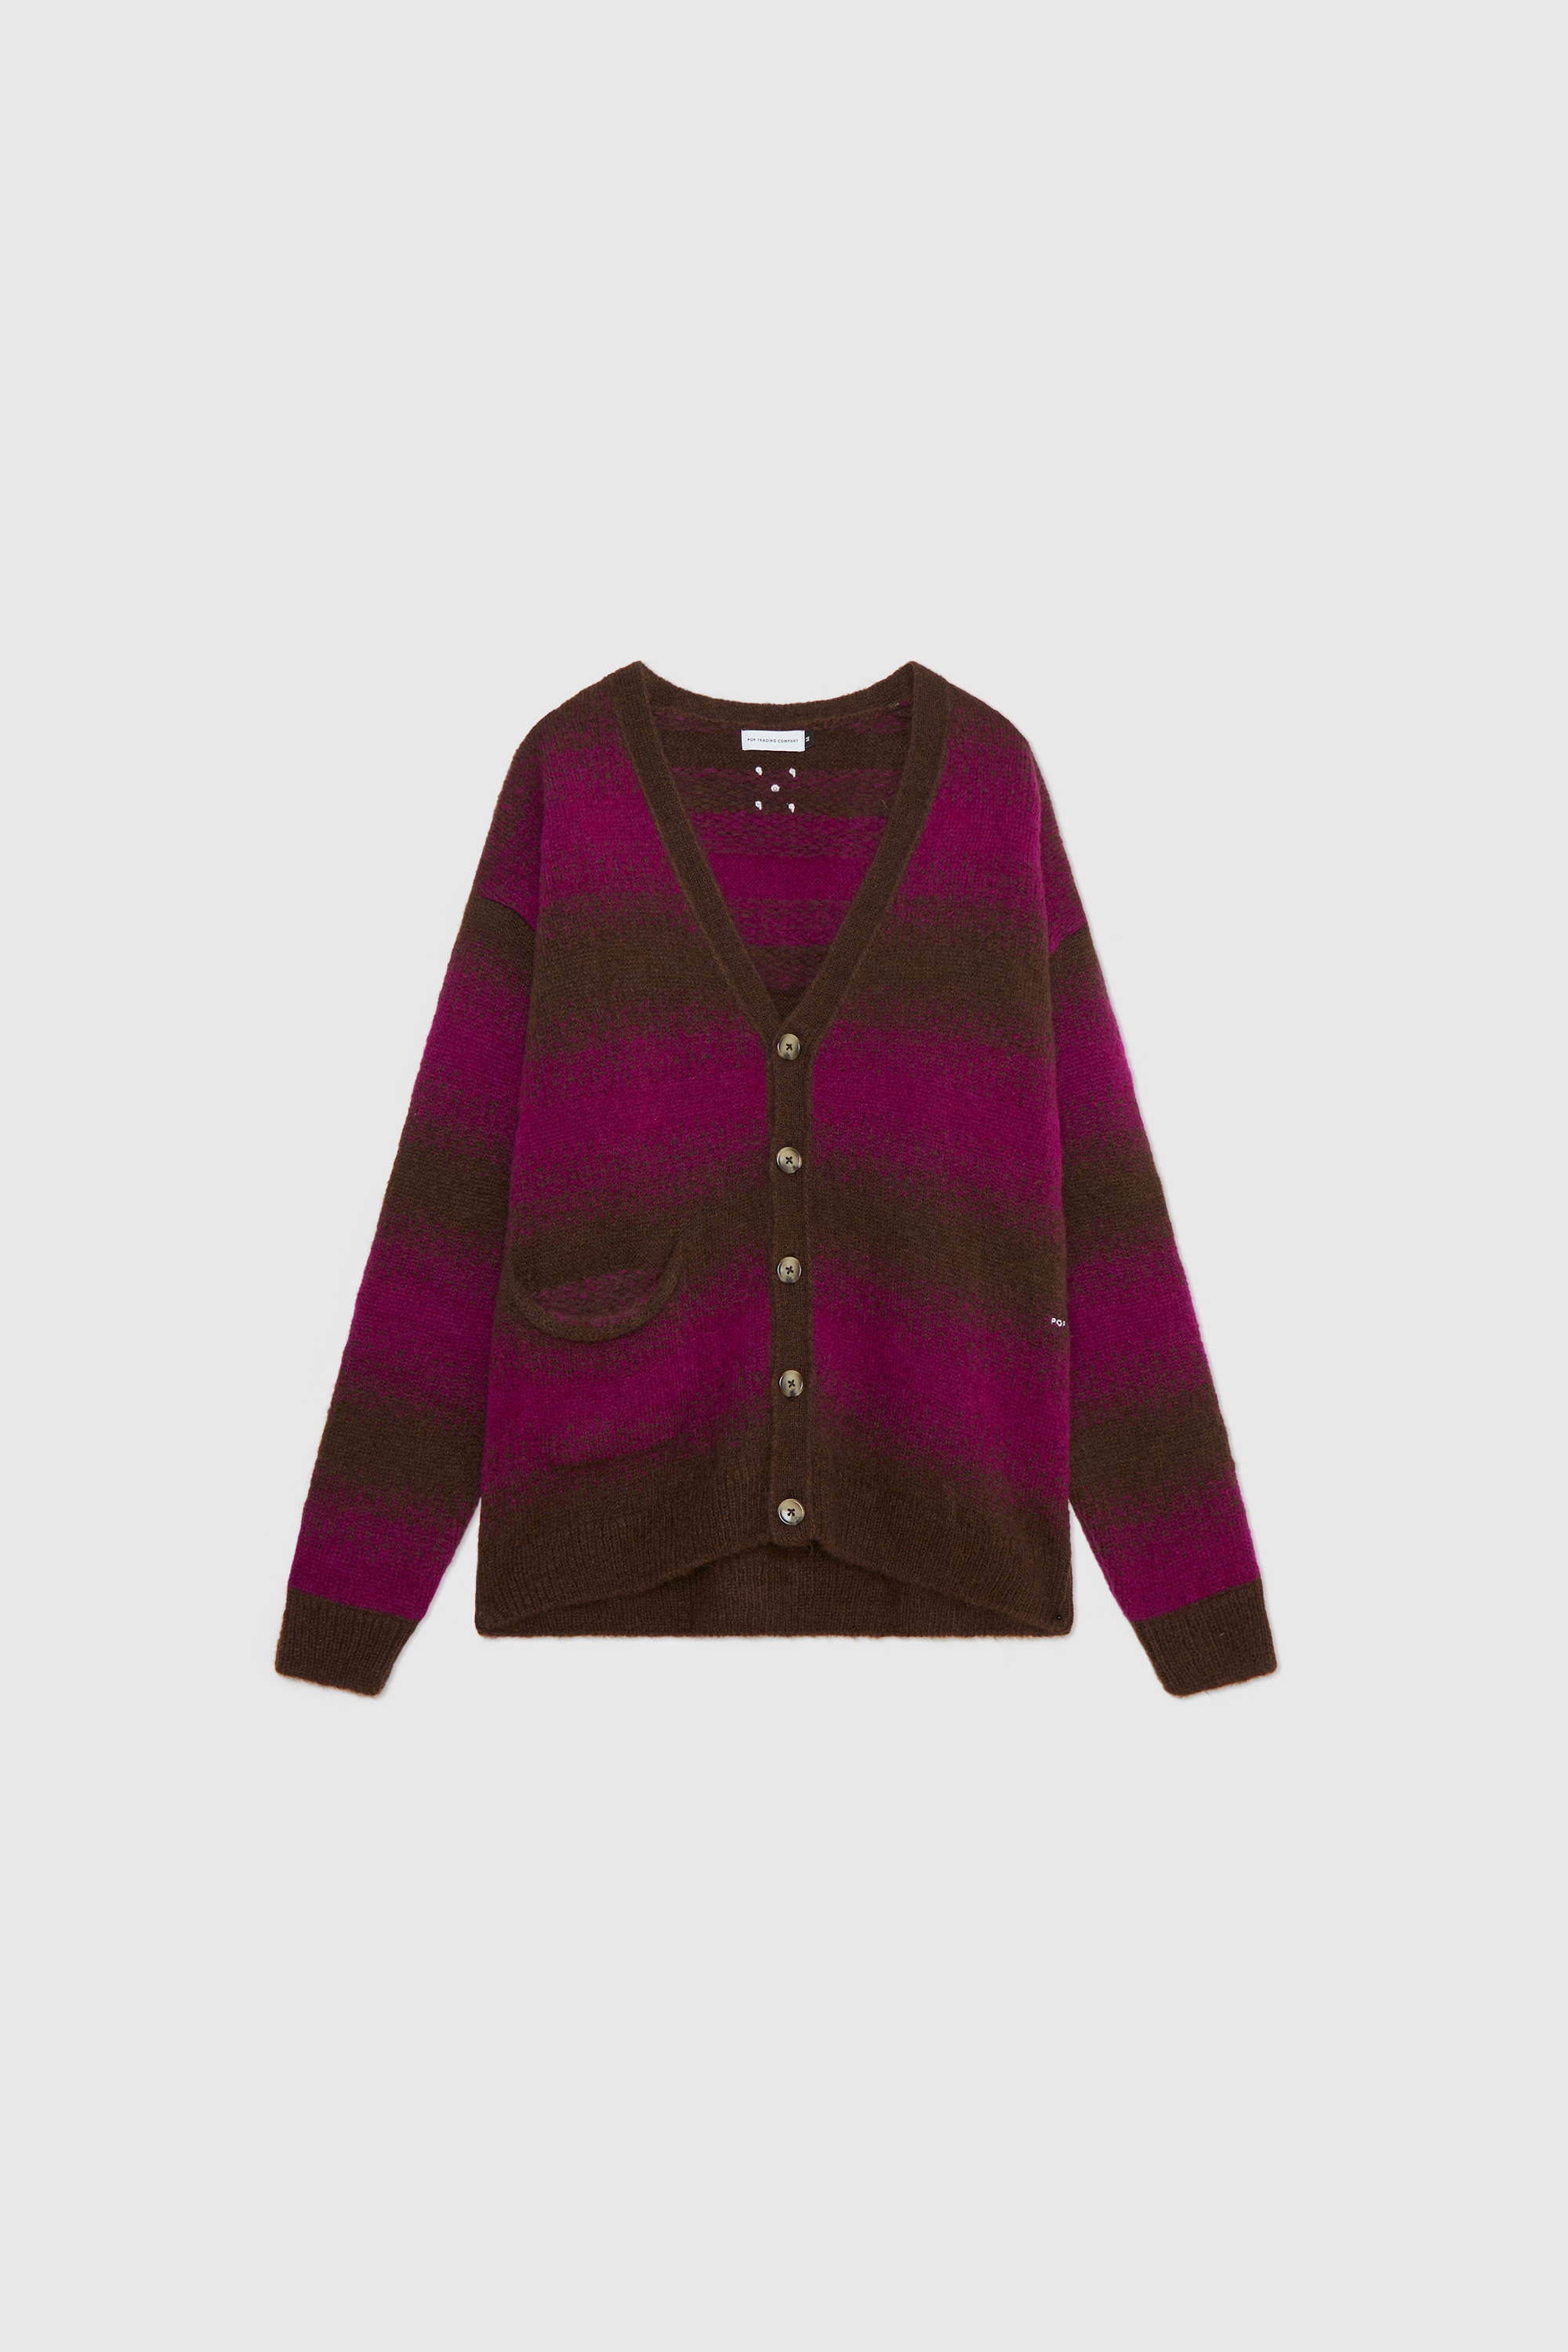 Pop Trading Company Knitted Cardigan Delicioso/rasberry | WoodWood.com